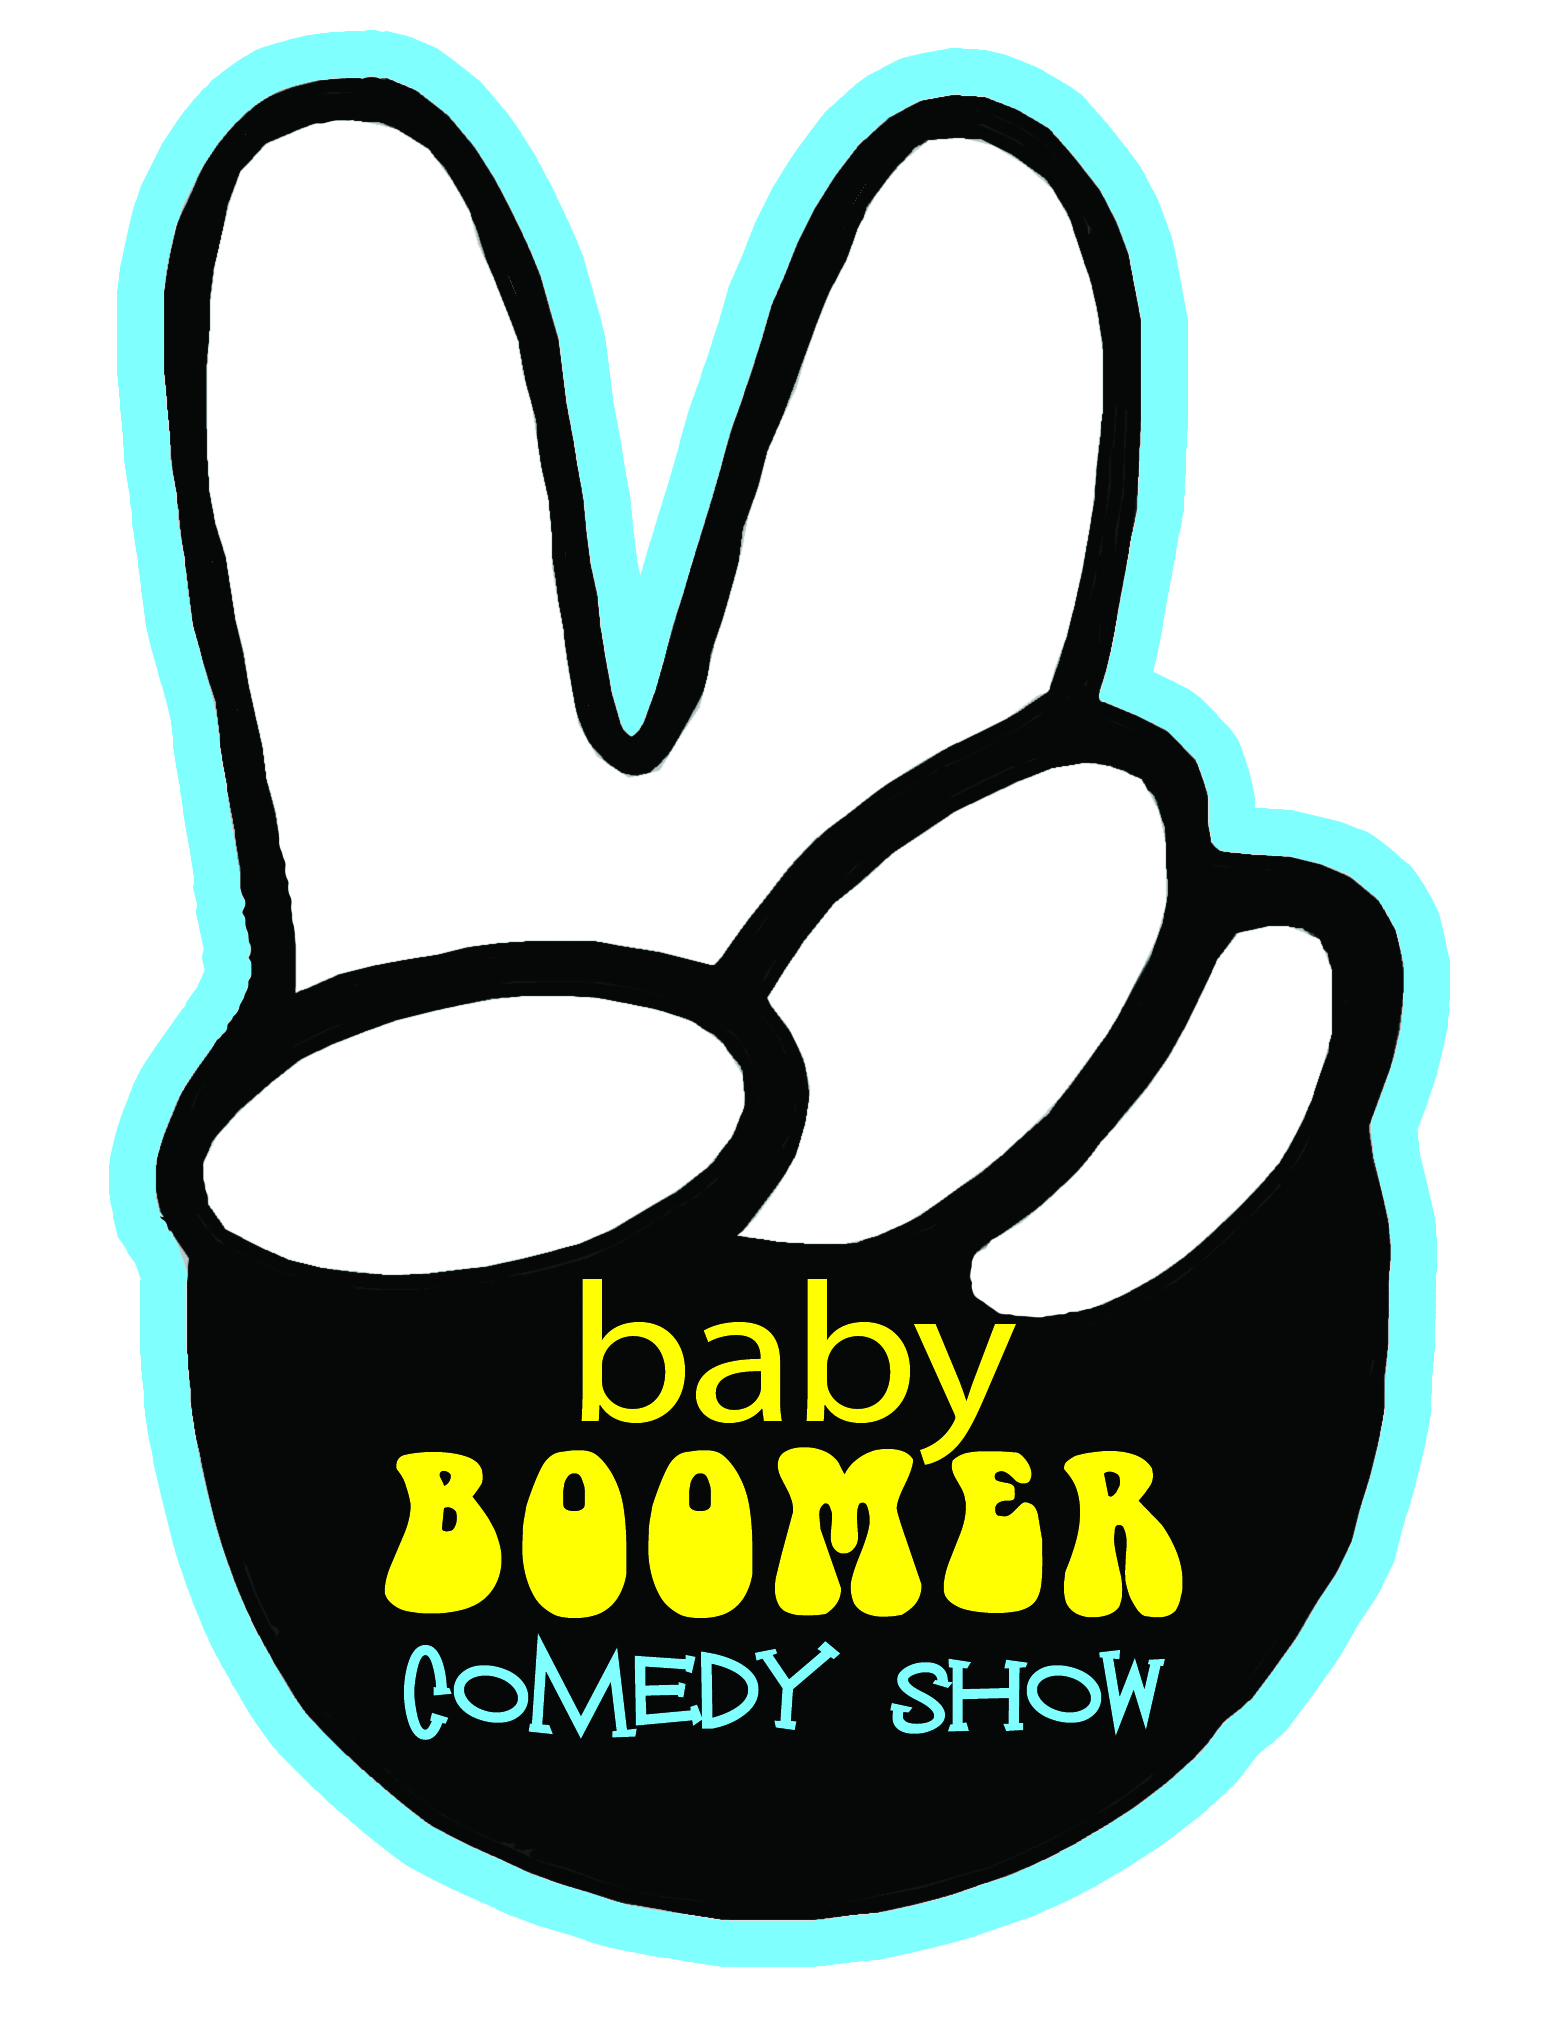 Baby Boomer Comedy Show